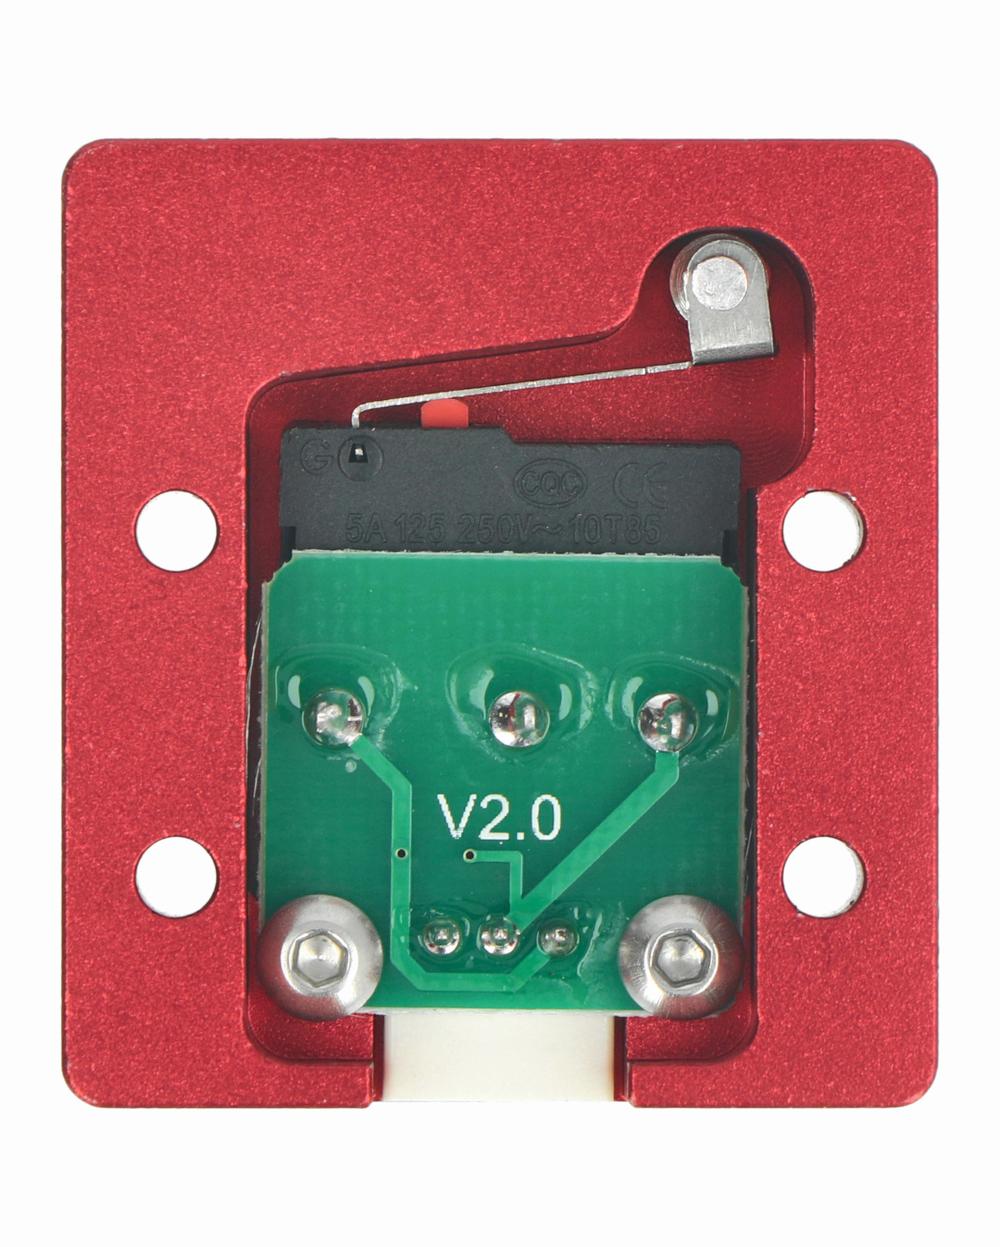 A red aluminum enclosure contains a green printed circuit board with a rocker switch.